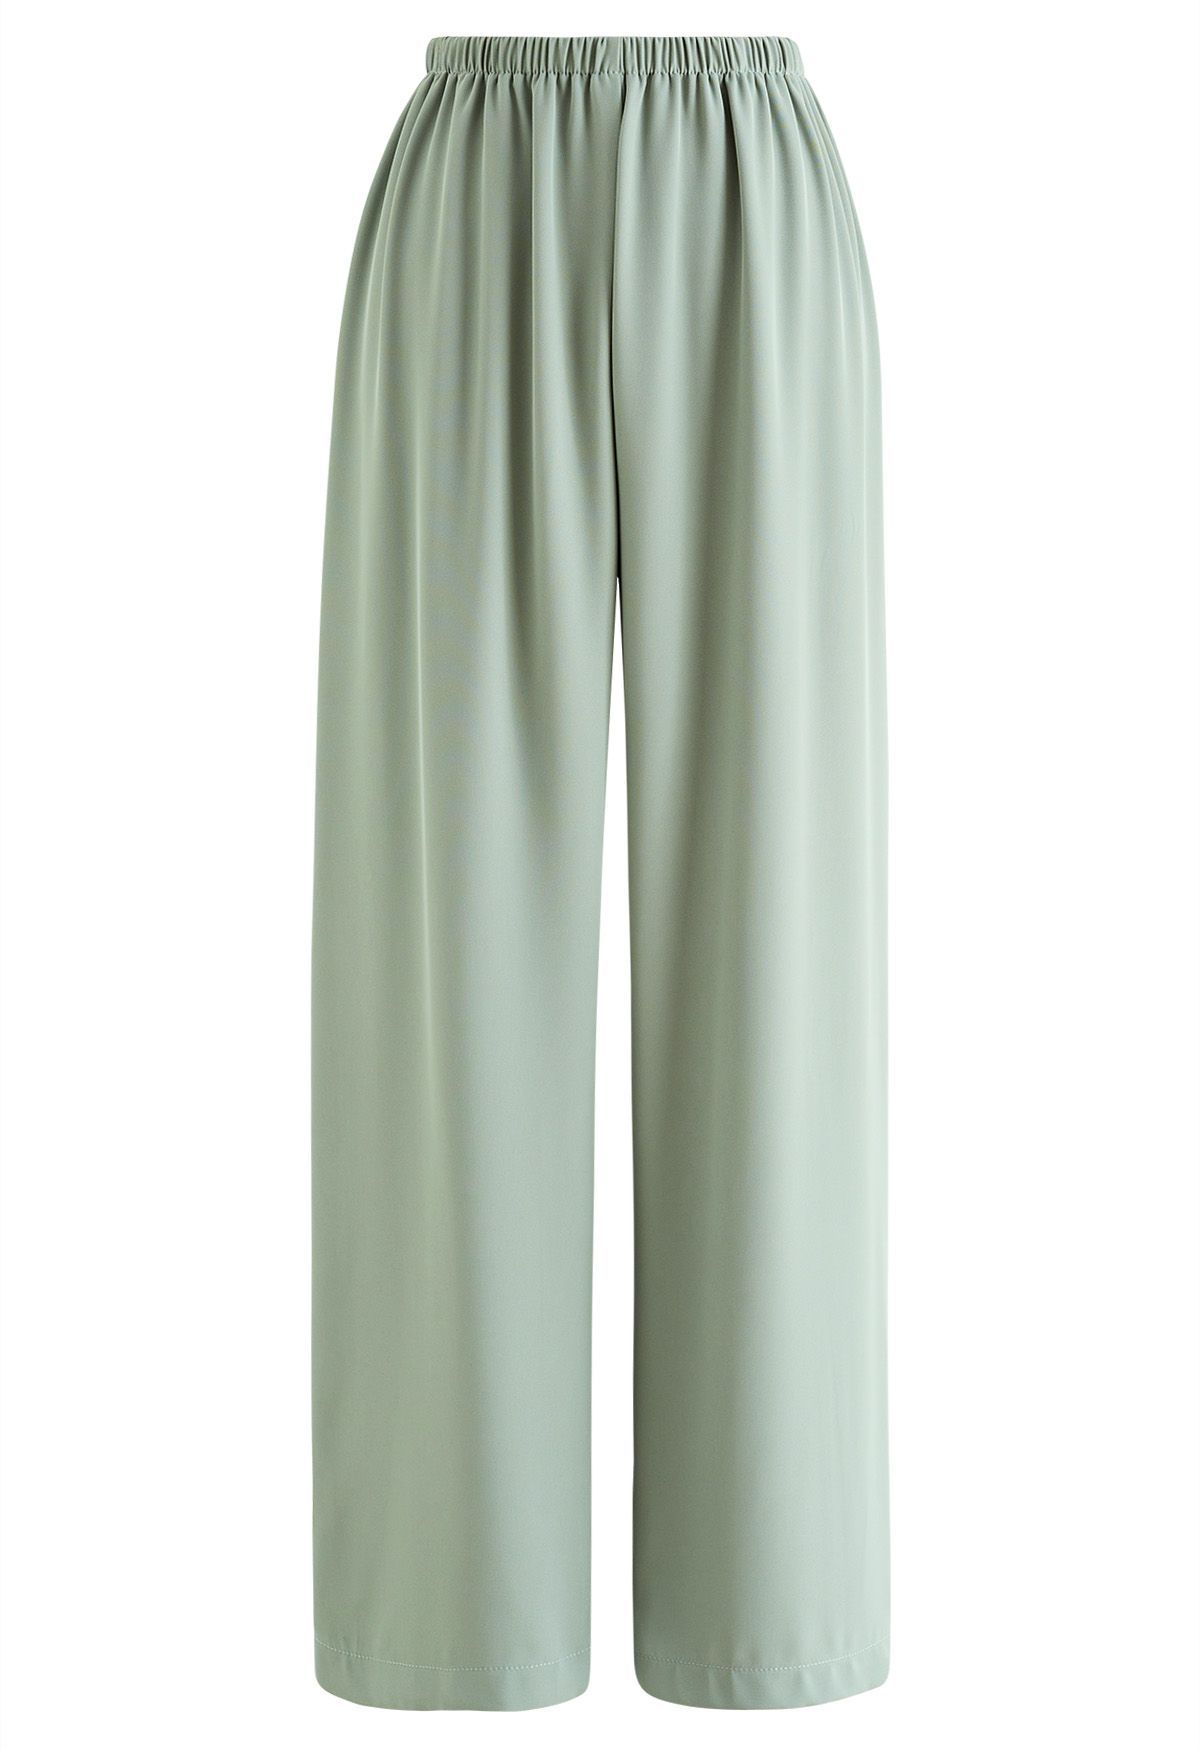 Smooth Satin Pull-On Pants in Pea Green | Chicwish